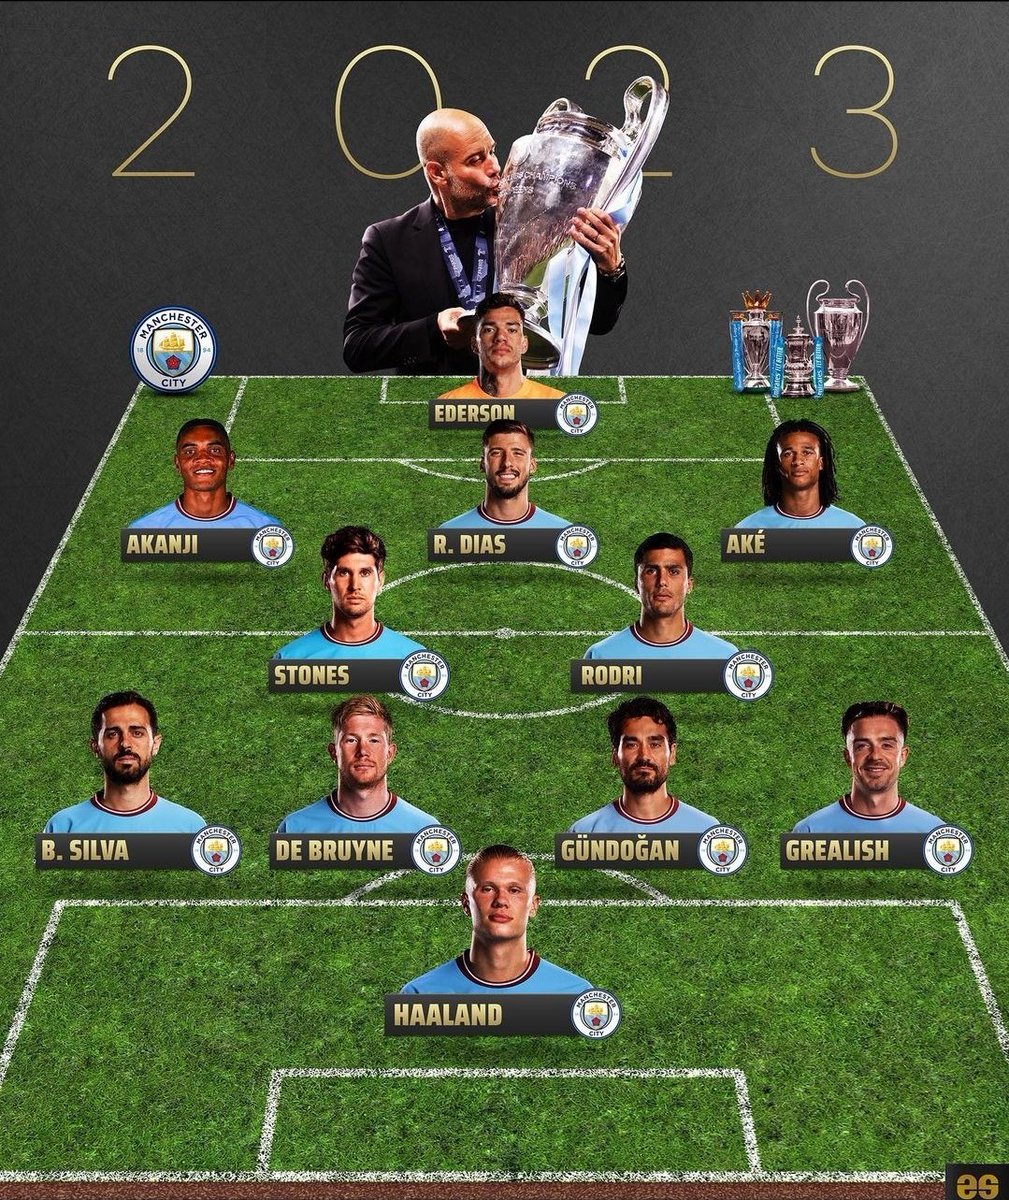 Who's wins? 

Treble 2009 or Treble 2023.

Prime Messi will deal with these Man City.